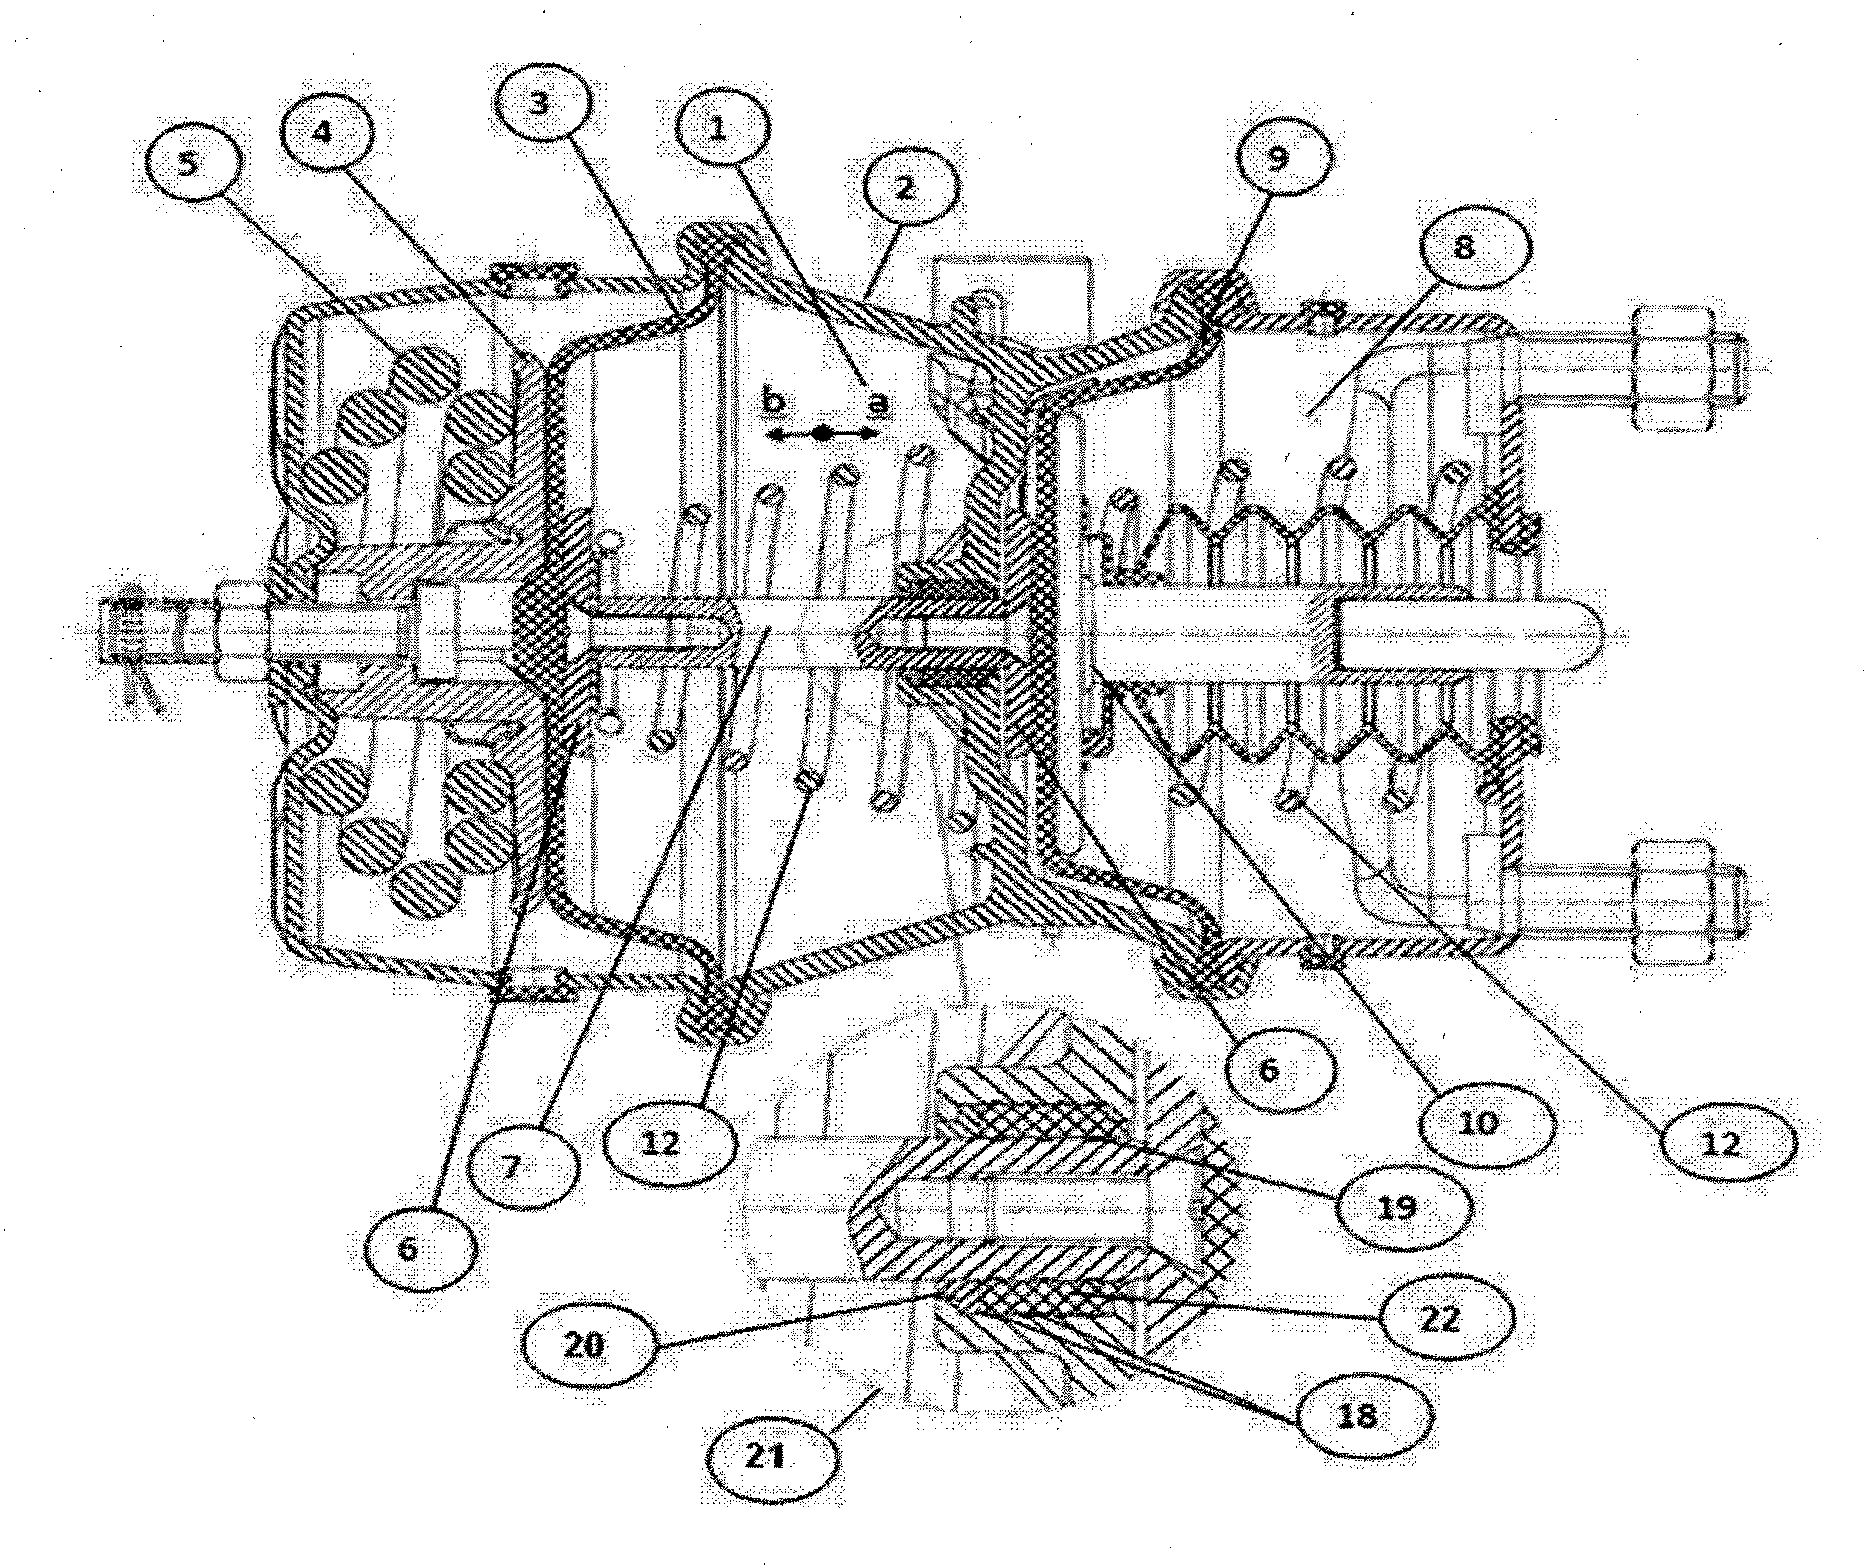 Center bearing of adapter plate comprising rubber and rigid plastic members developed for spring brake actuators